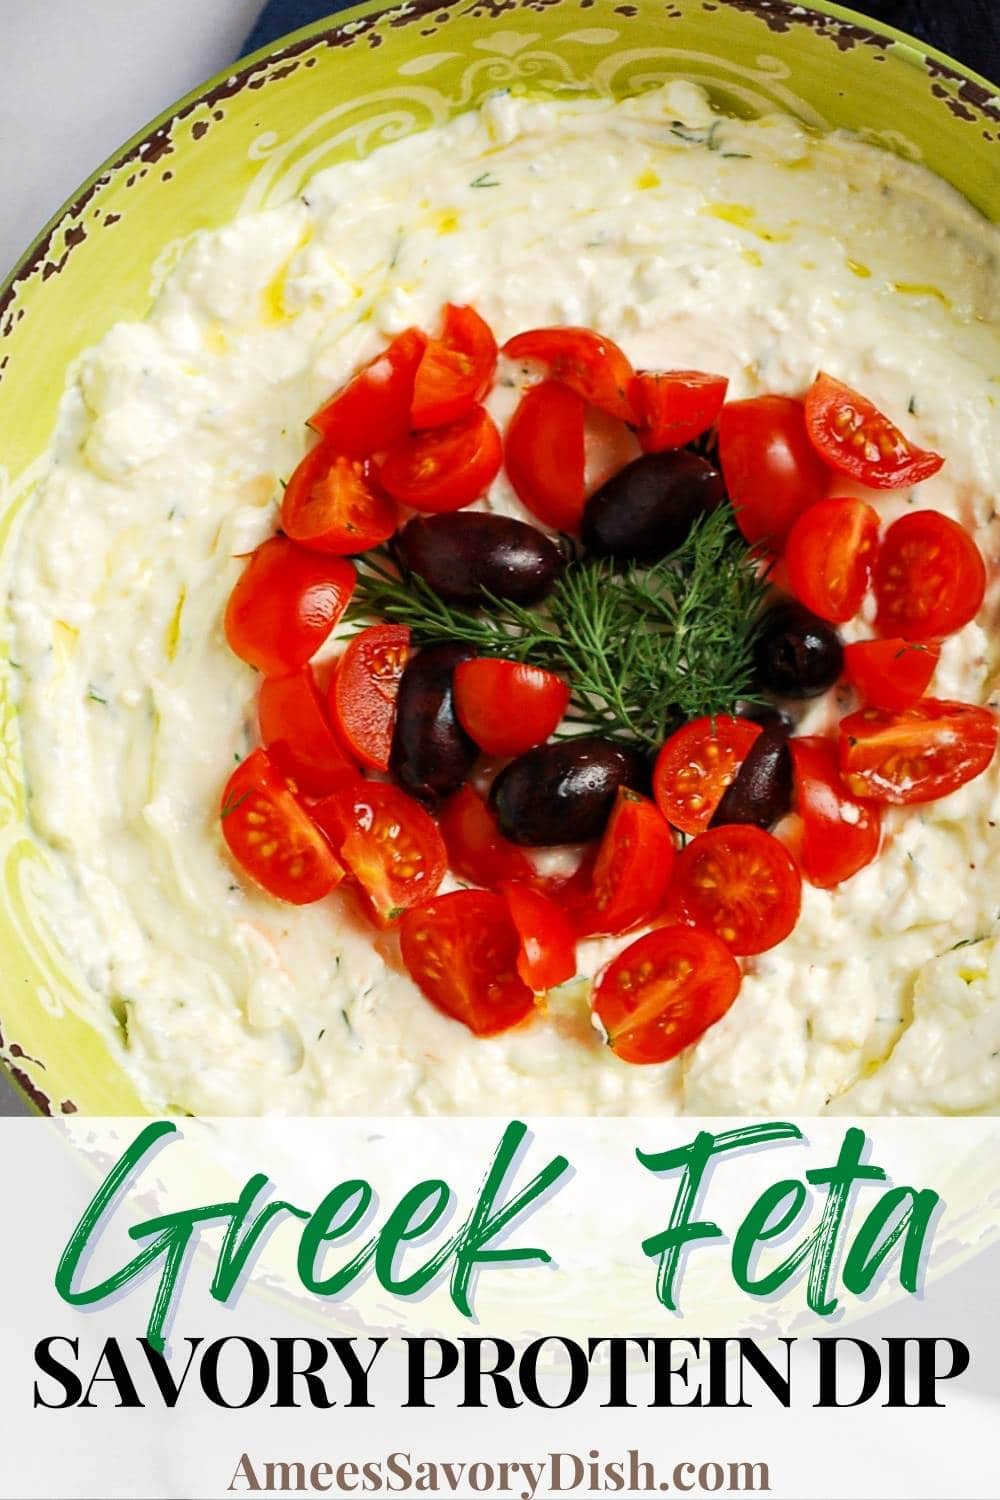 A flavorful whipped Greek feta protein dip made with Greek yogurt, whipped cream cheese, crumbled feta, herbs, and fresh lemon juice.  This dip recipe makes a great party appetizer or a tasty sandwich spread on pita bread or wraps! via @Ameessavorydish